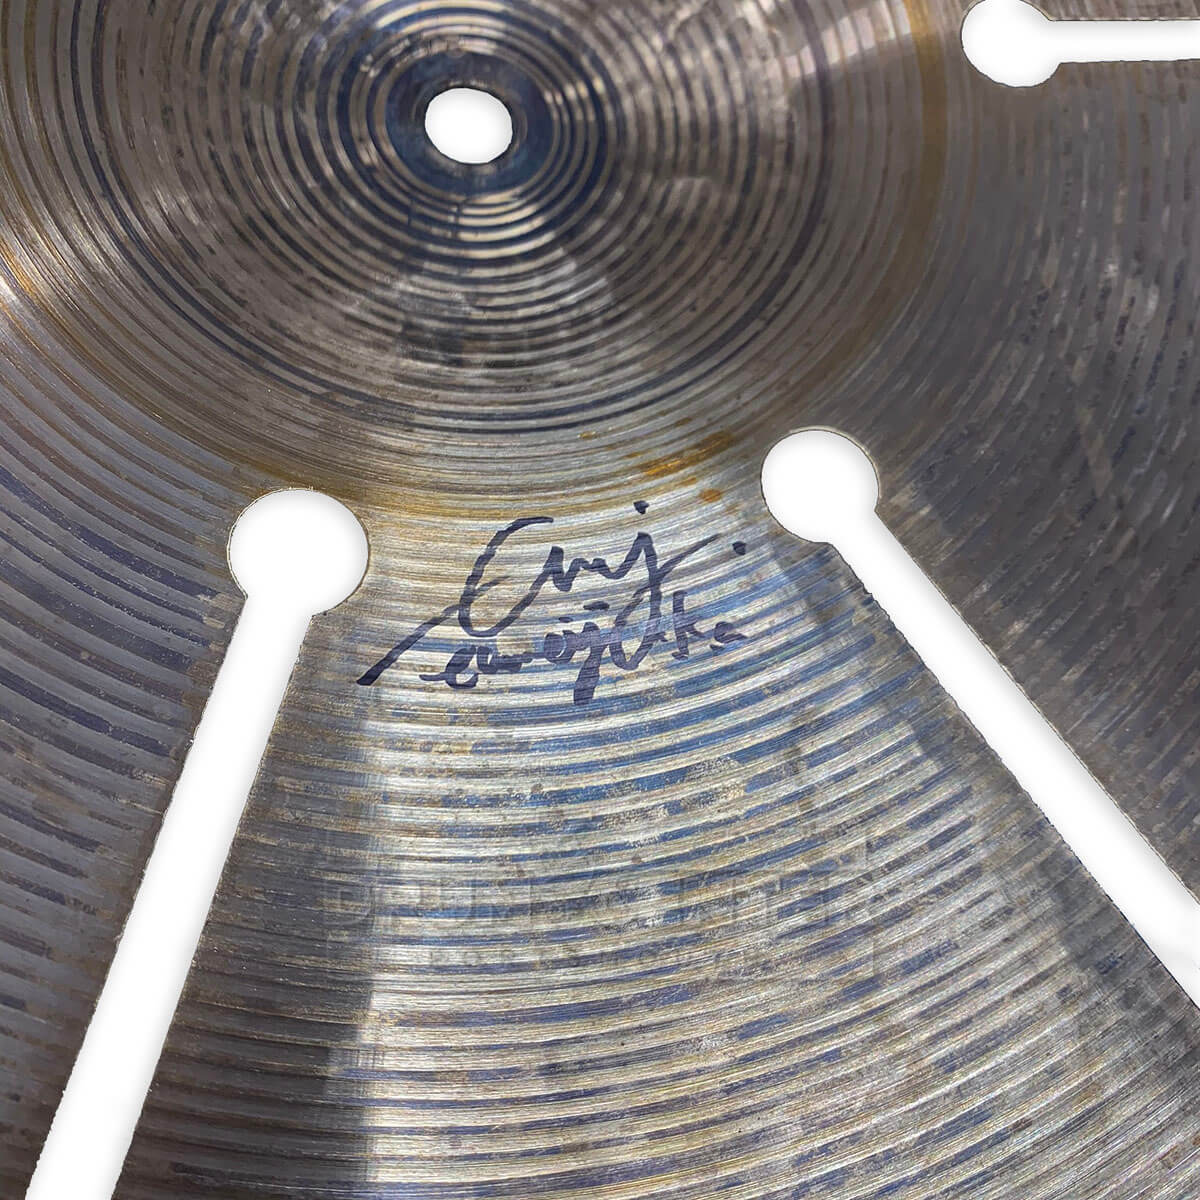 Koide Tang Multi-Tone Cymbal 20" - Drum Center Of Portsmouth